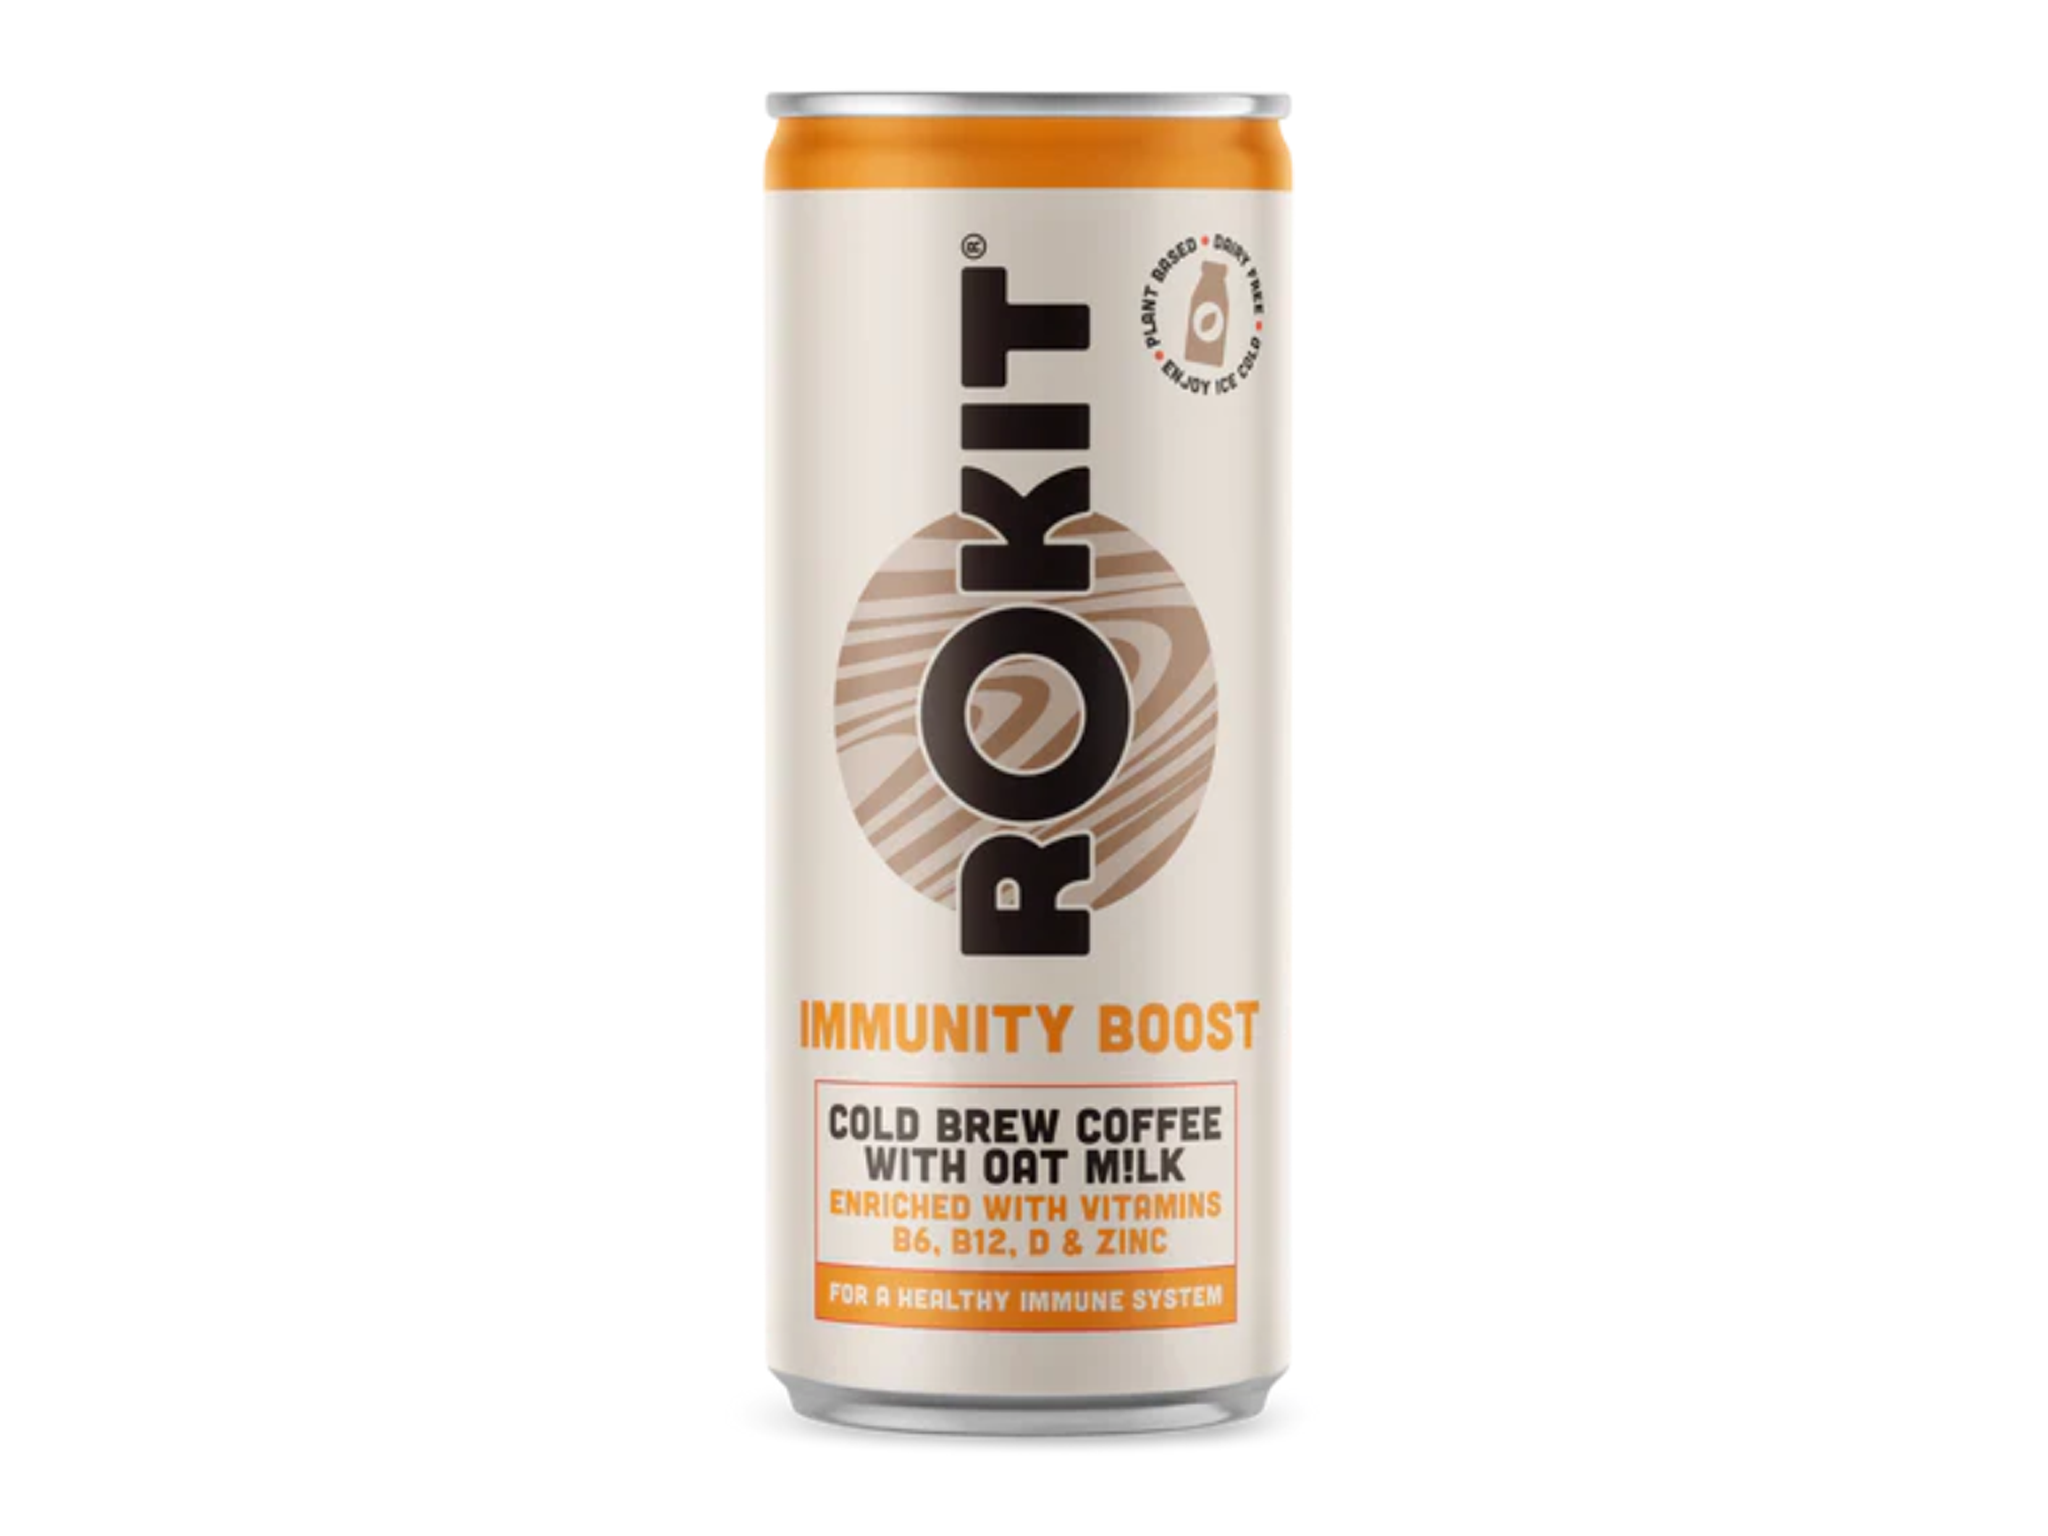 Rokit cold brew coffee with oat milk